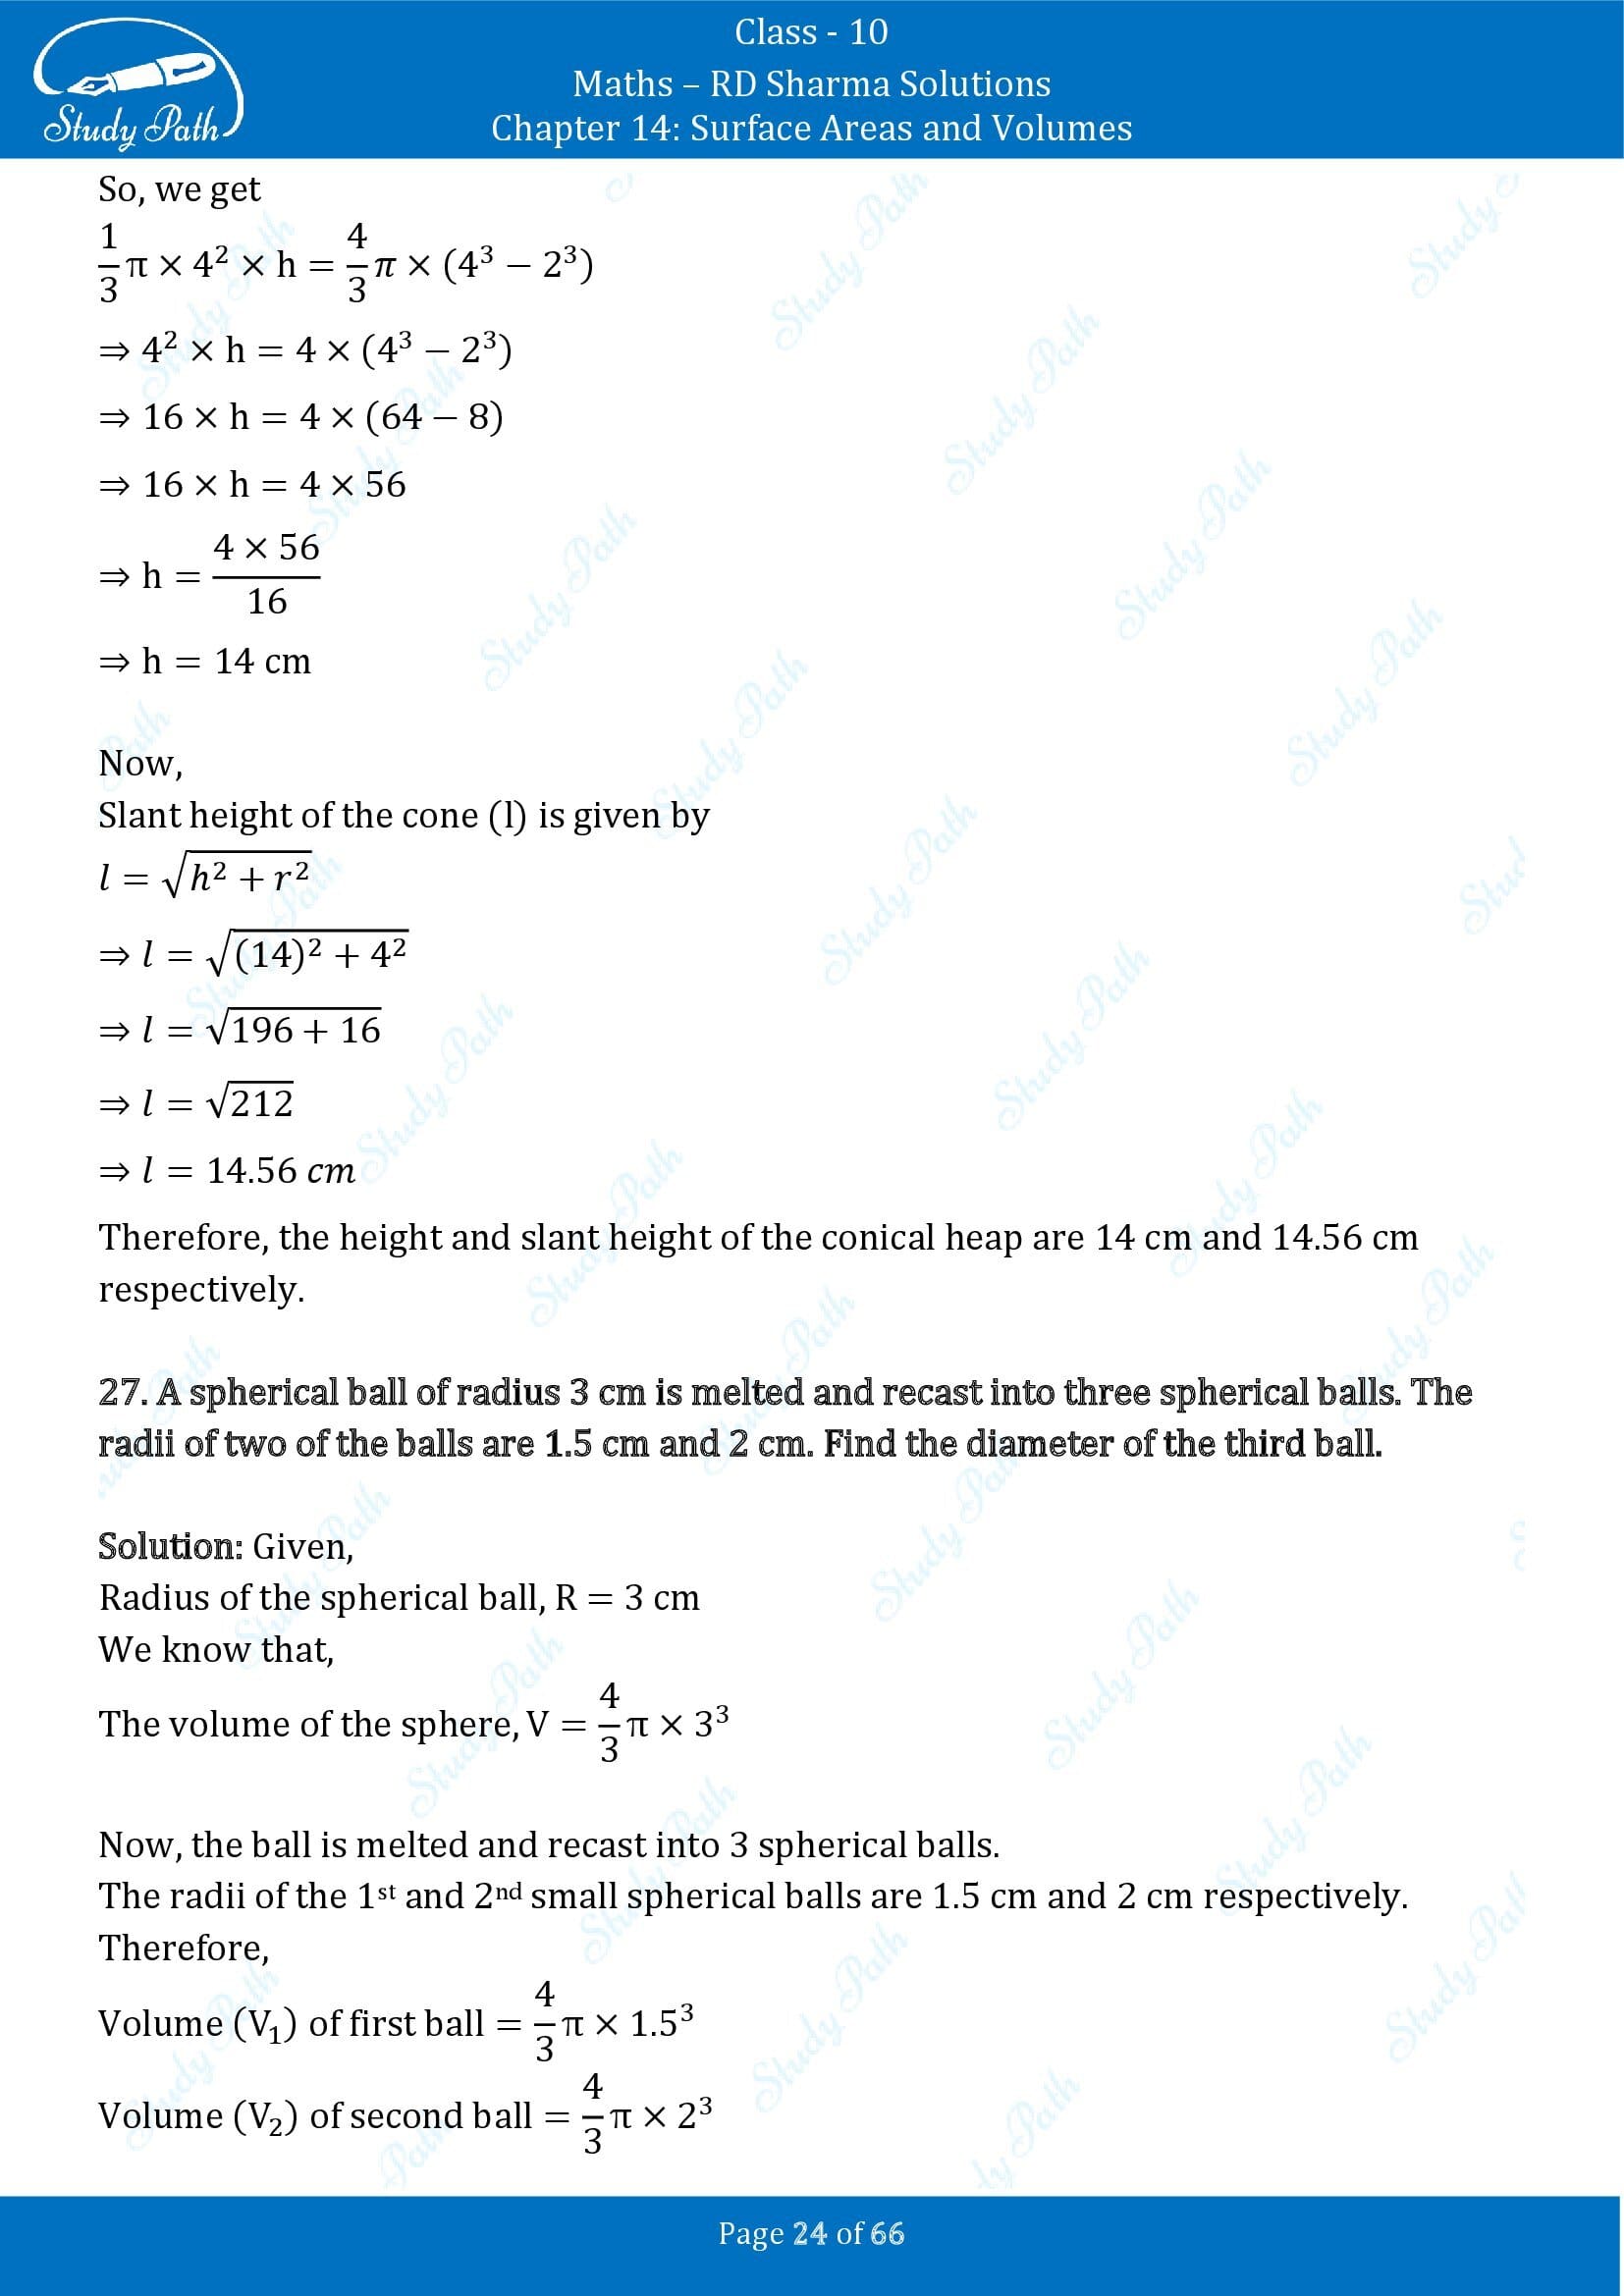 RD Sharma Solutions Class 10 Chapter 14 Surface Areas and Volumes Exercise 14.1 00024